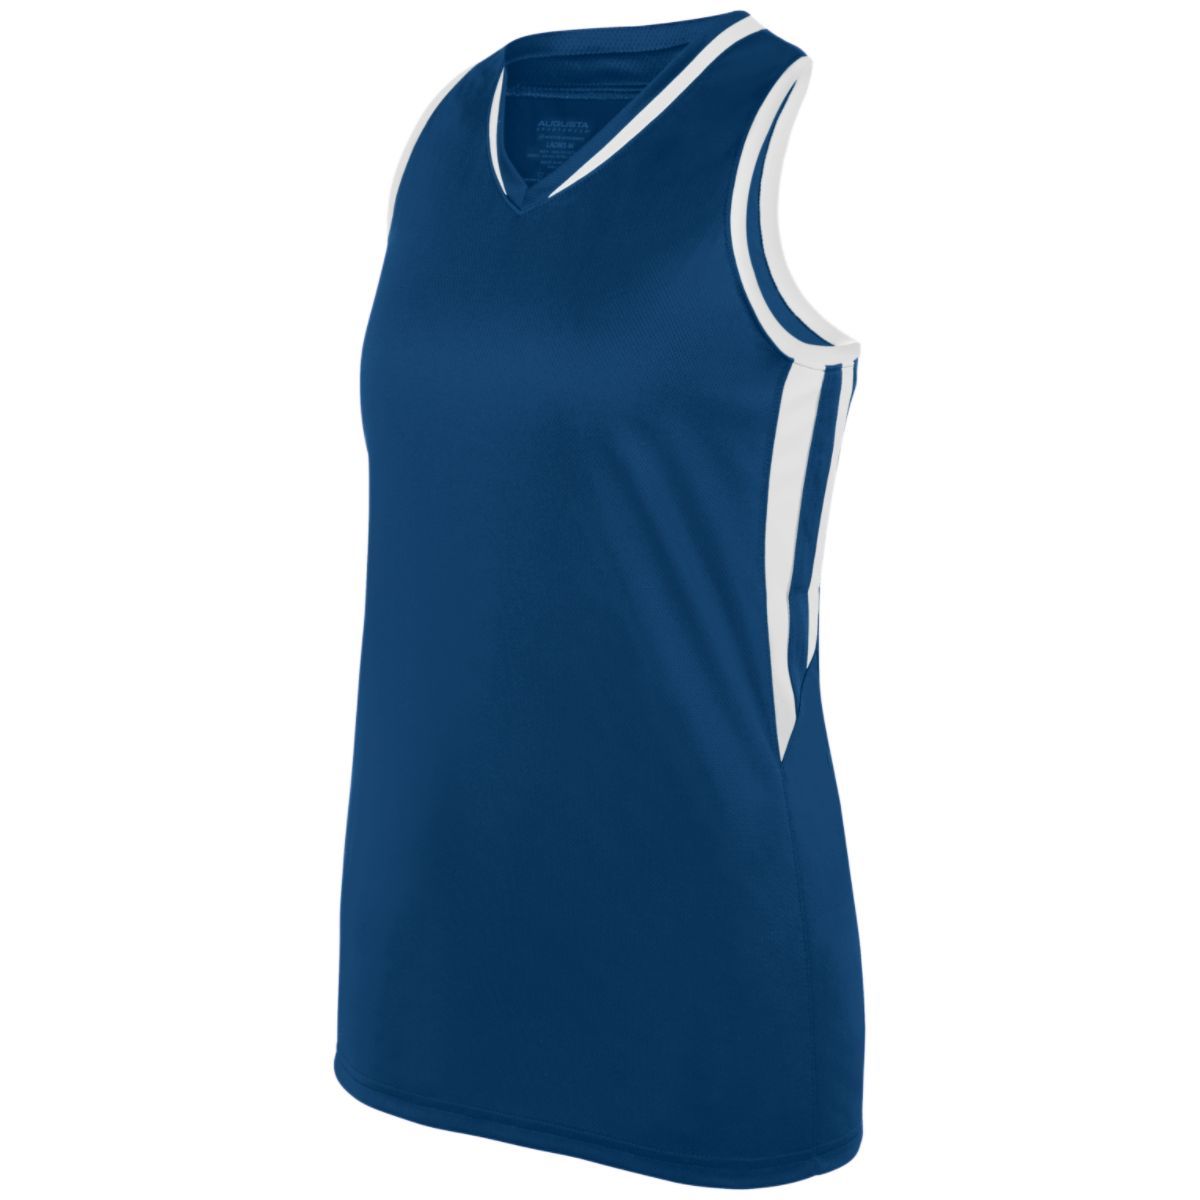 Augusta Sportswear Girls Full Force Tank in Navy/White  -Part of the Girls, Augusta-Products, Girls-Tank, Shirts product lines at KanaleyCreations.com